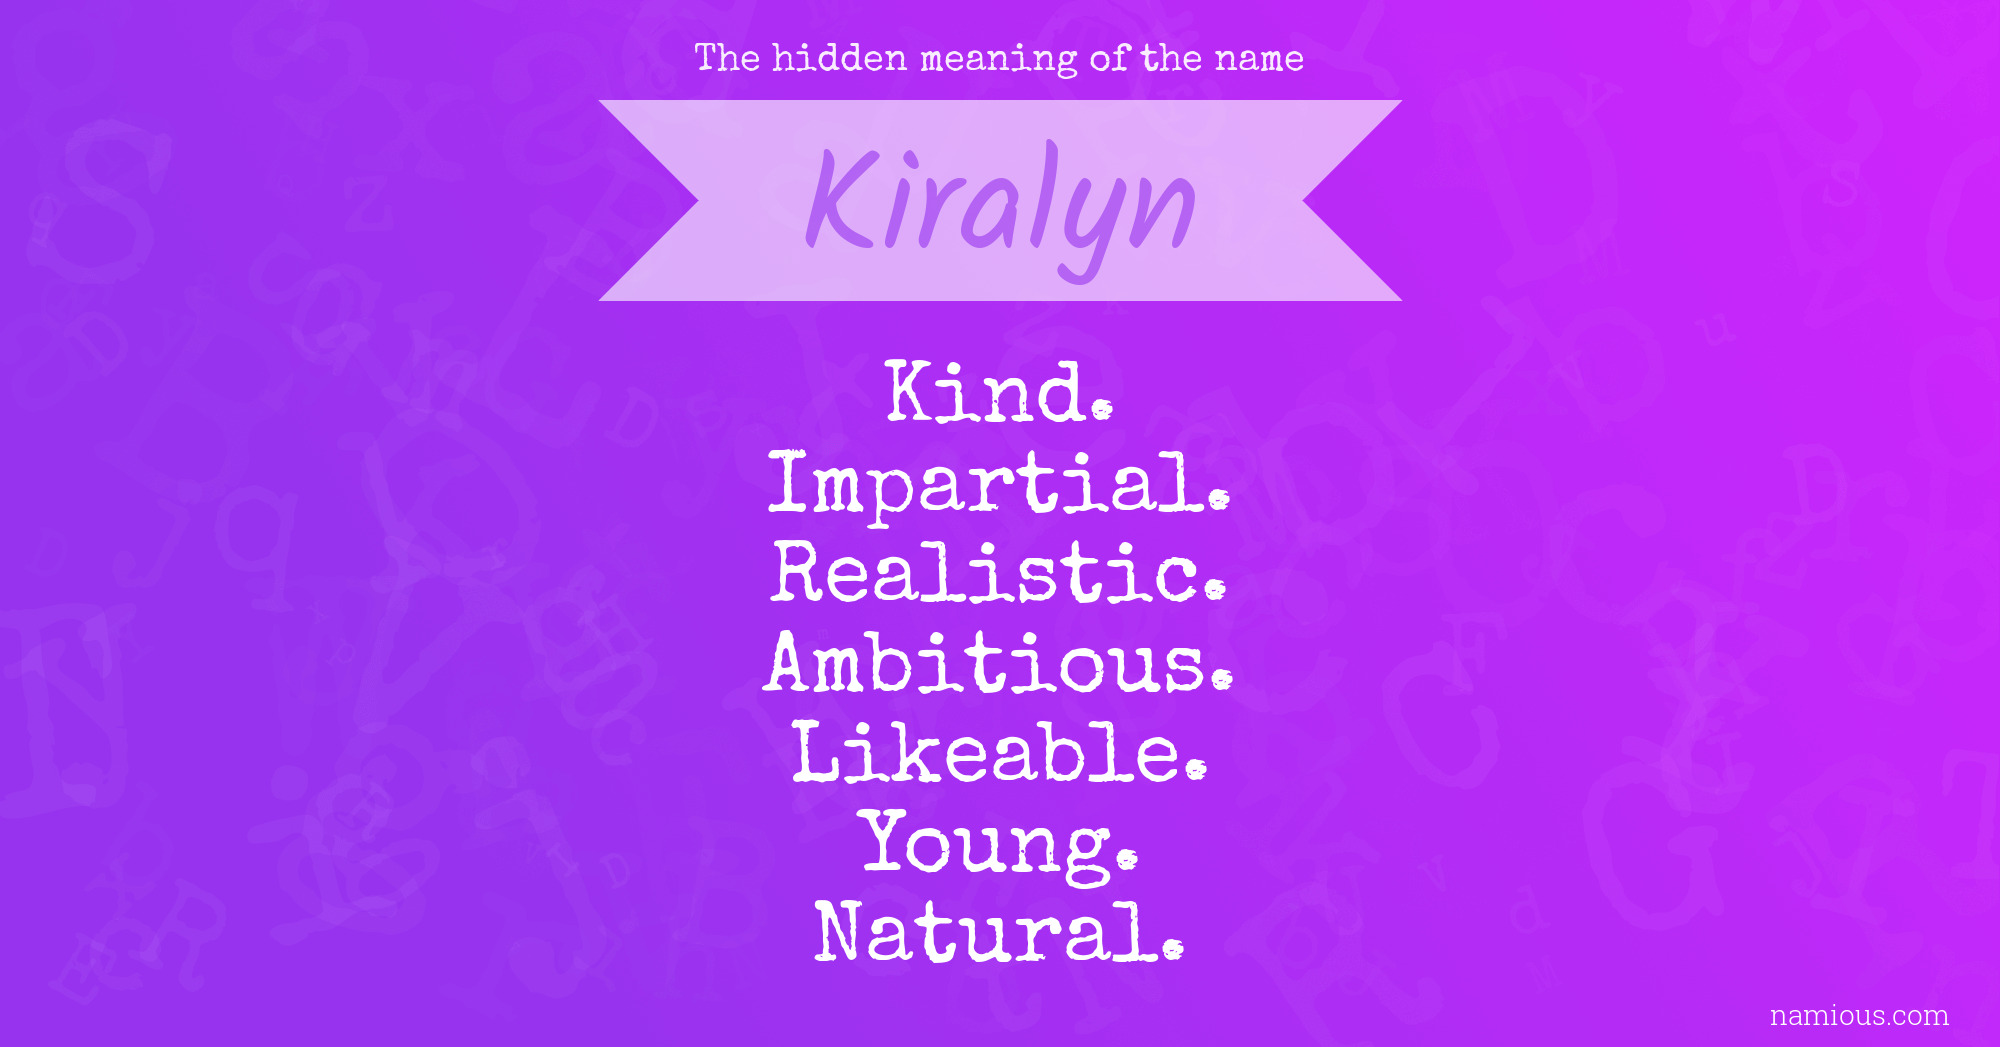 The hidden meaning of the name Kiralyn